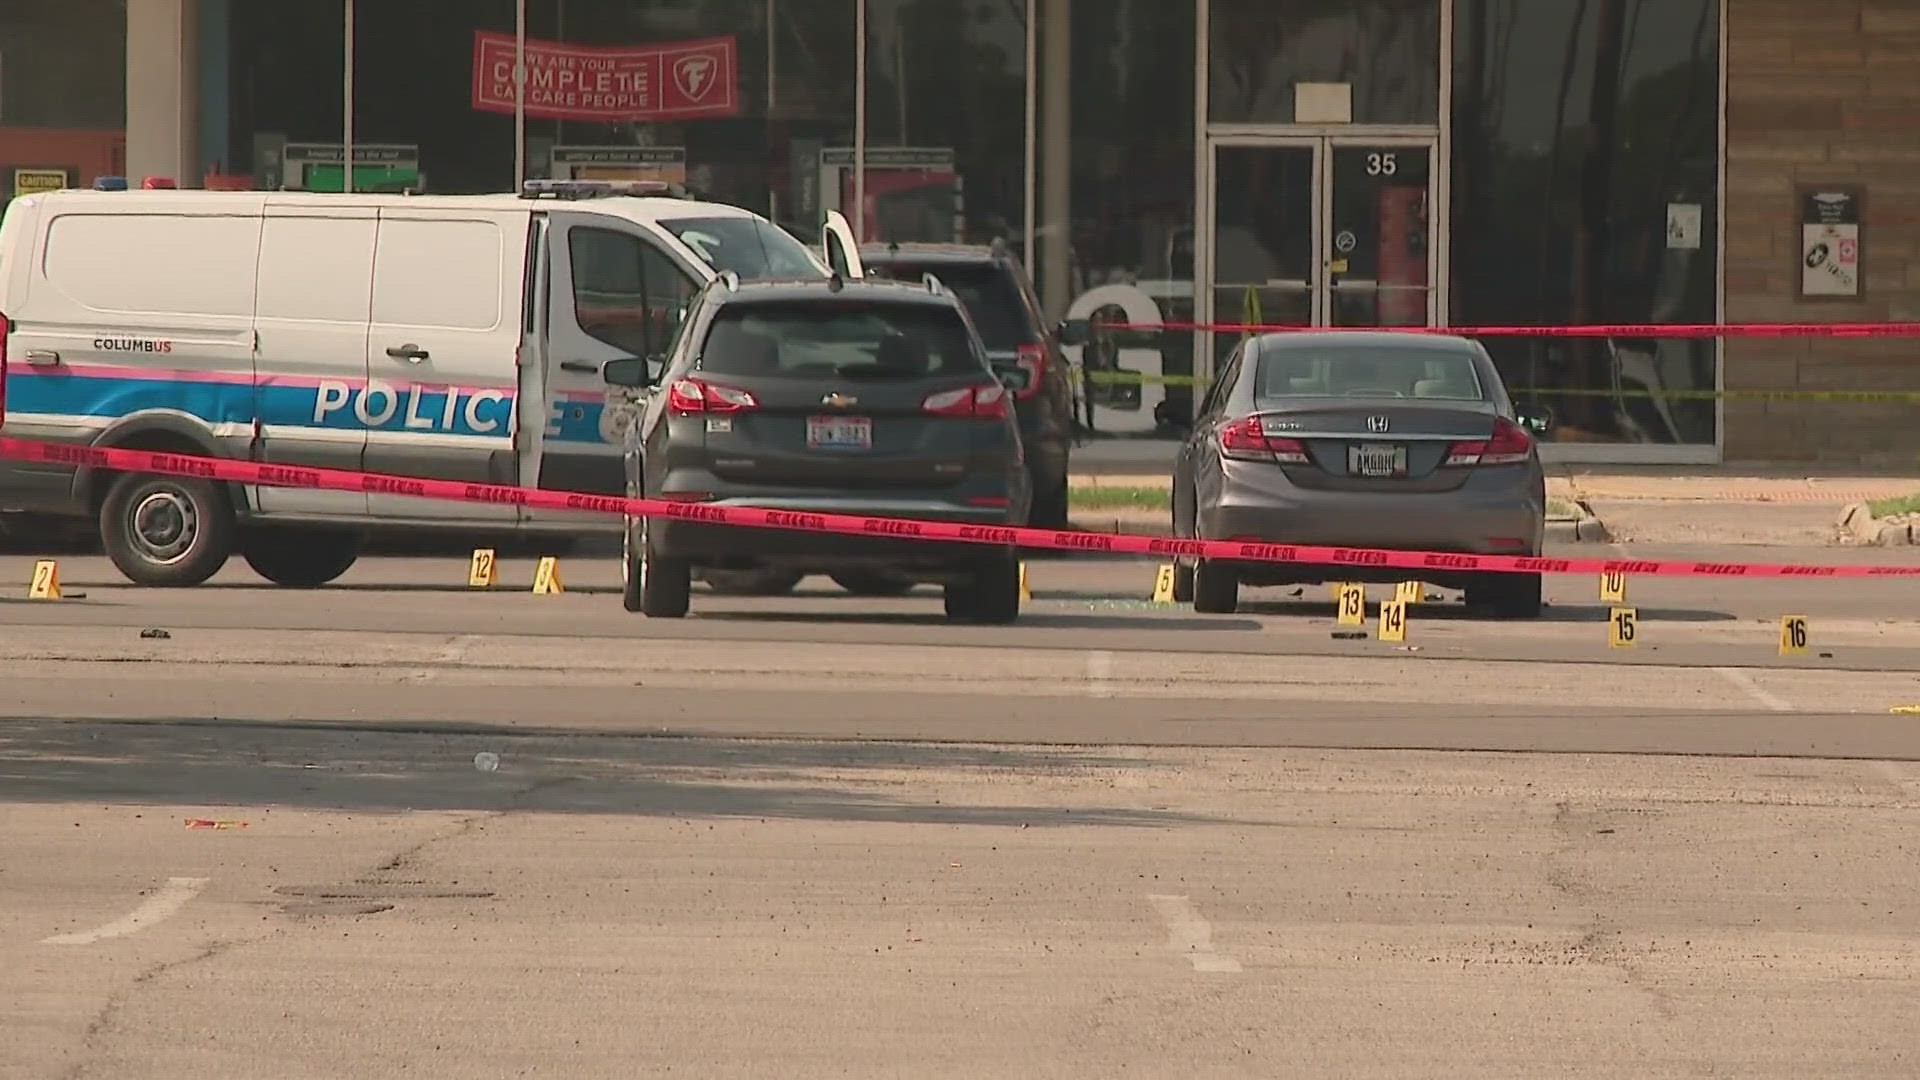 A CPD officer was injured during an exchange of gunfire at a south Columbus shopping center on Wednesday. The suspect was killed in the shooting.